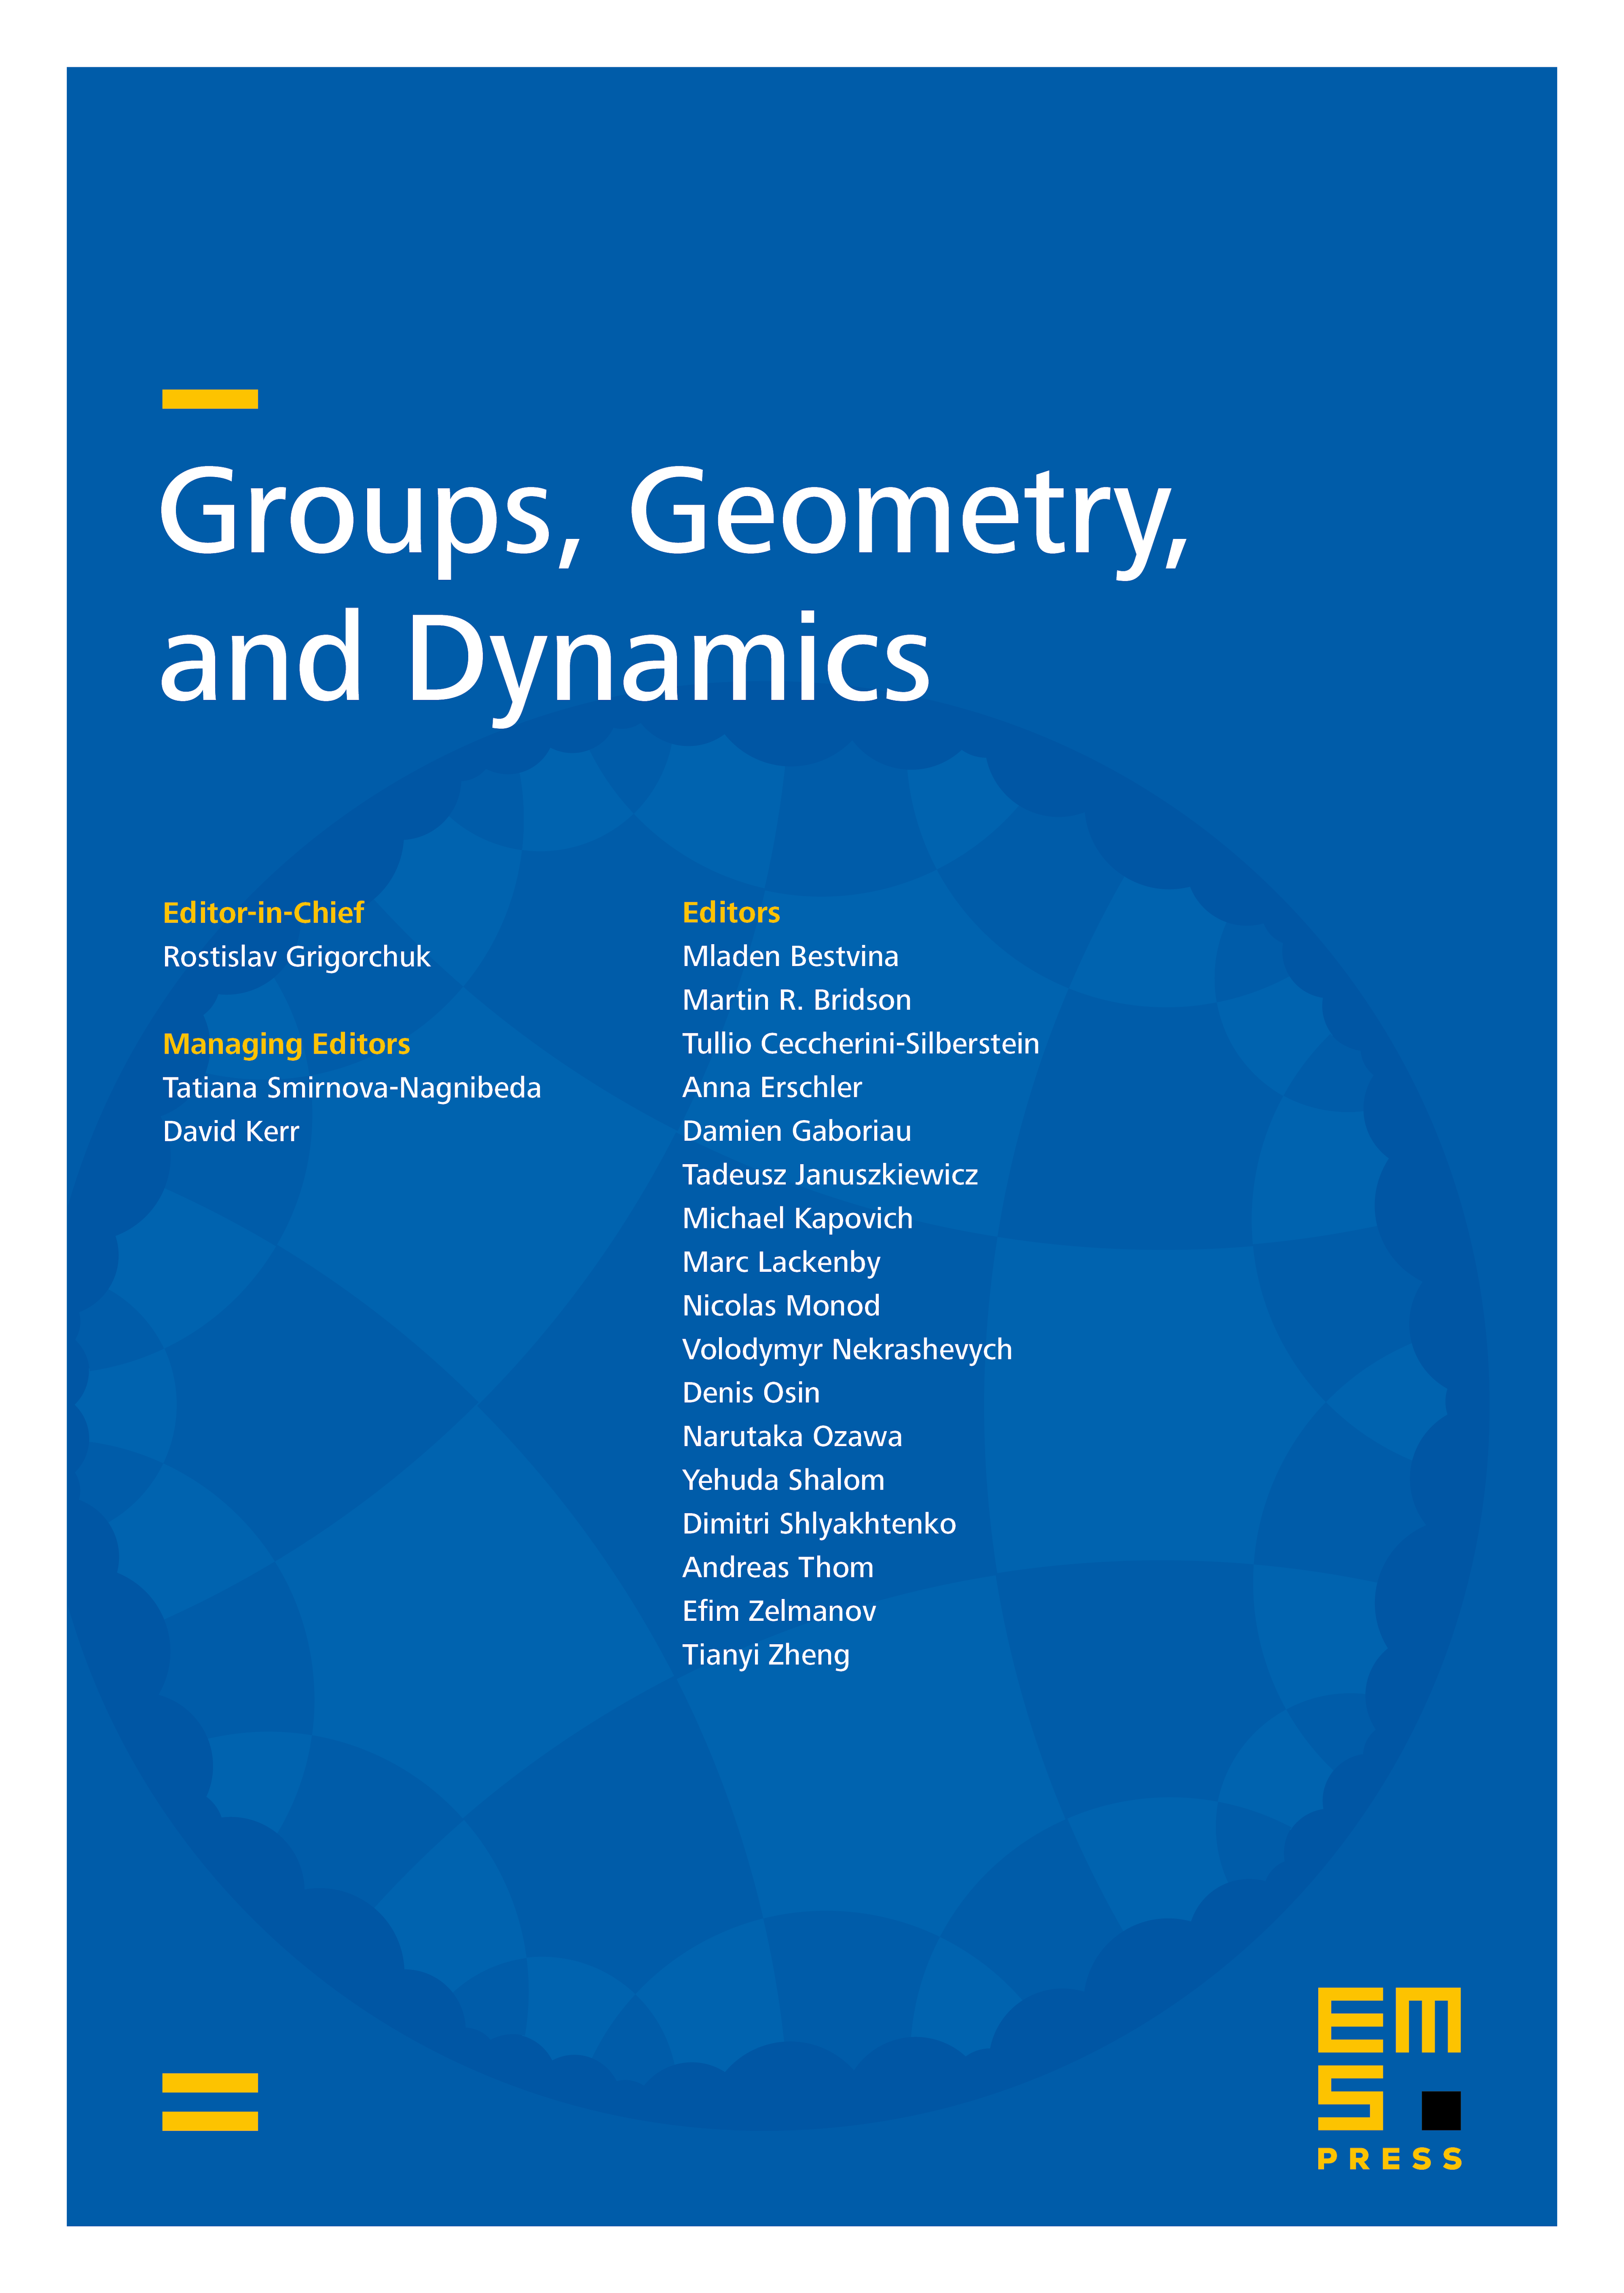 Palindromic automorphisms of right-angled Artin groups cover